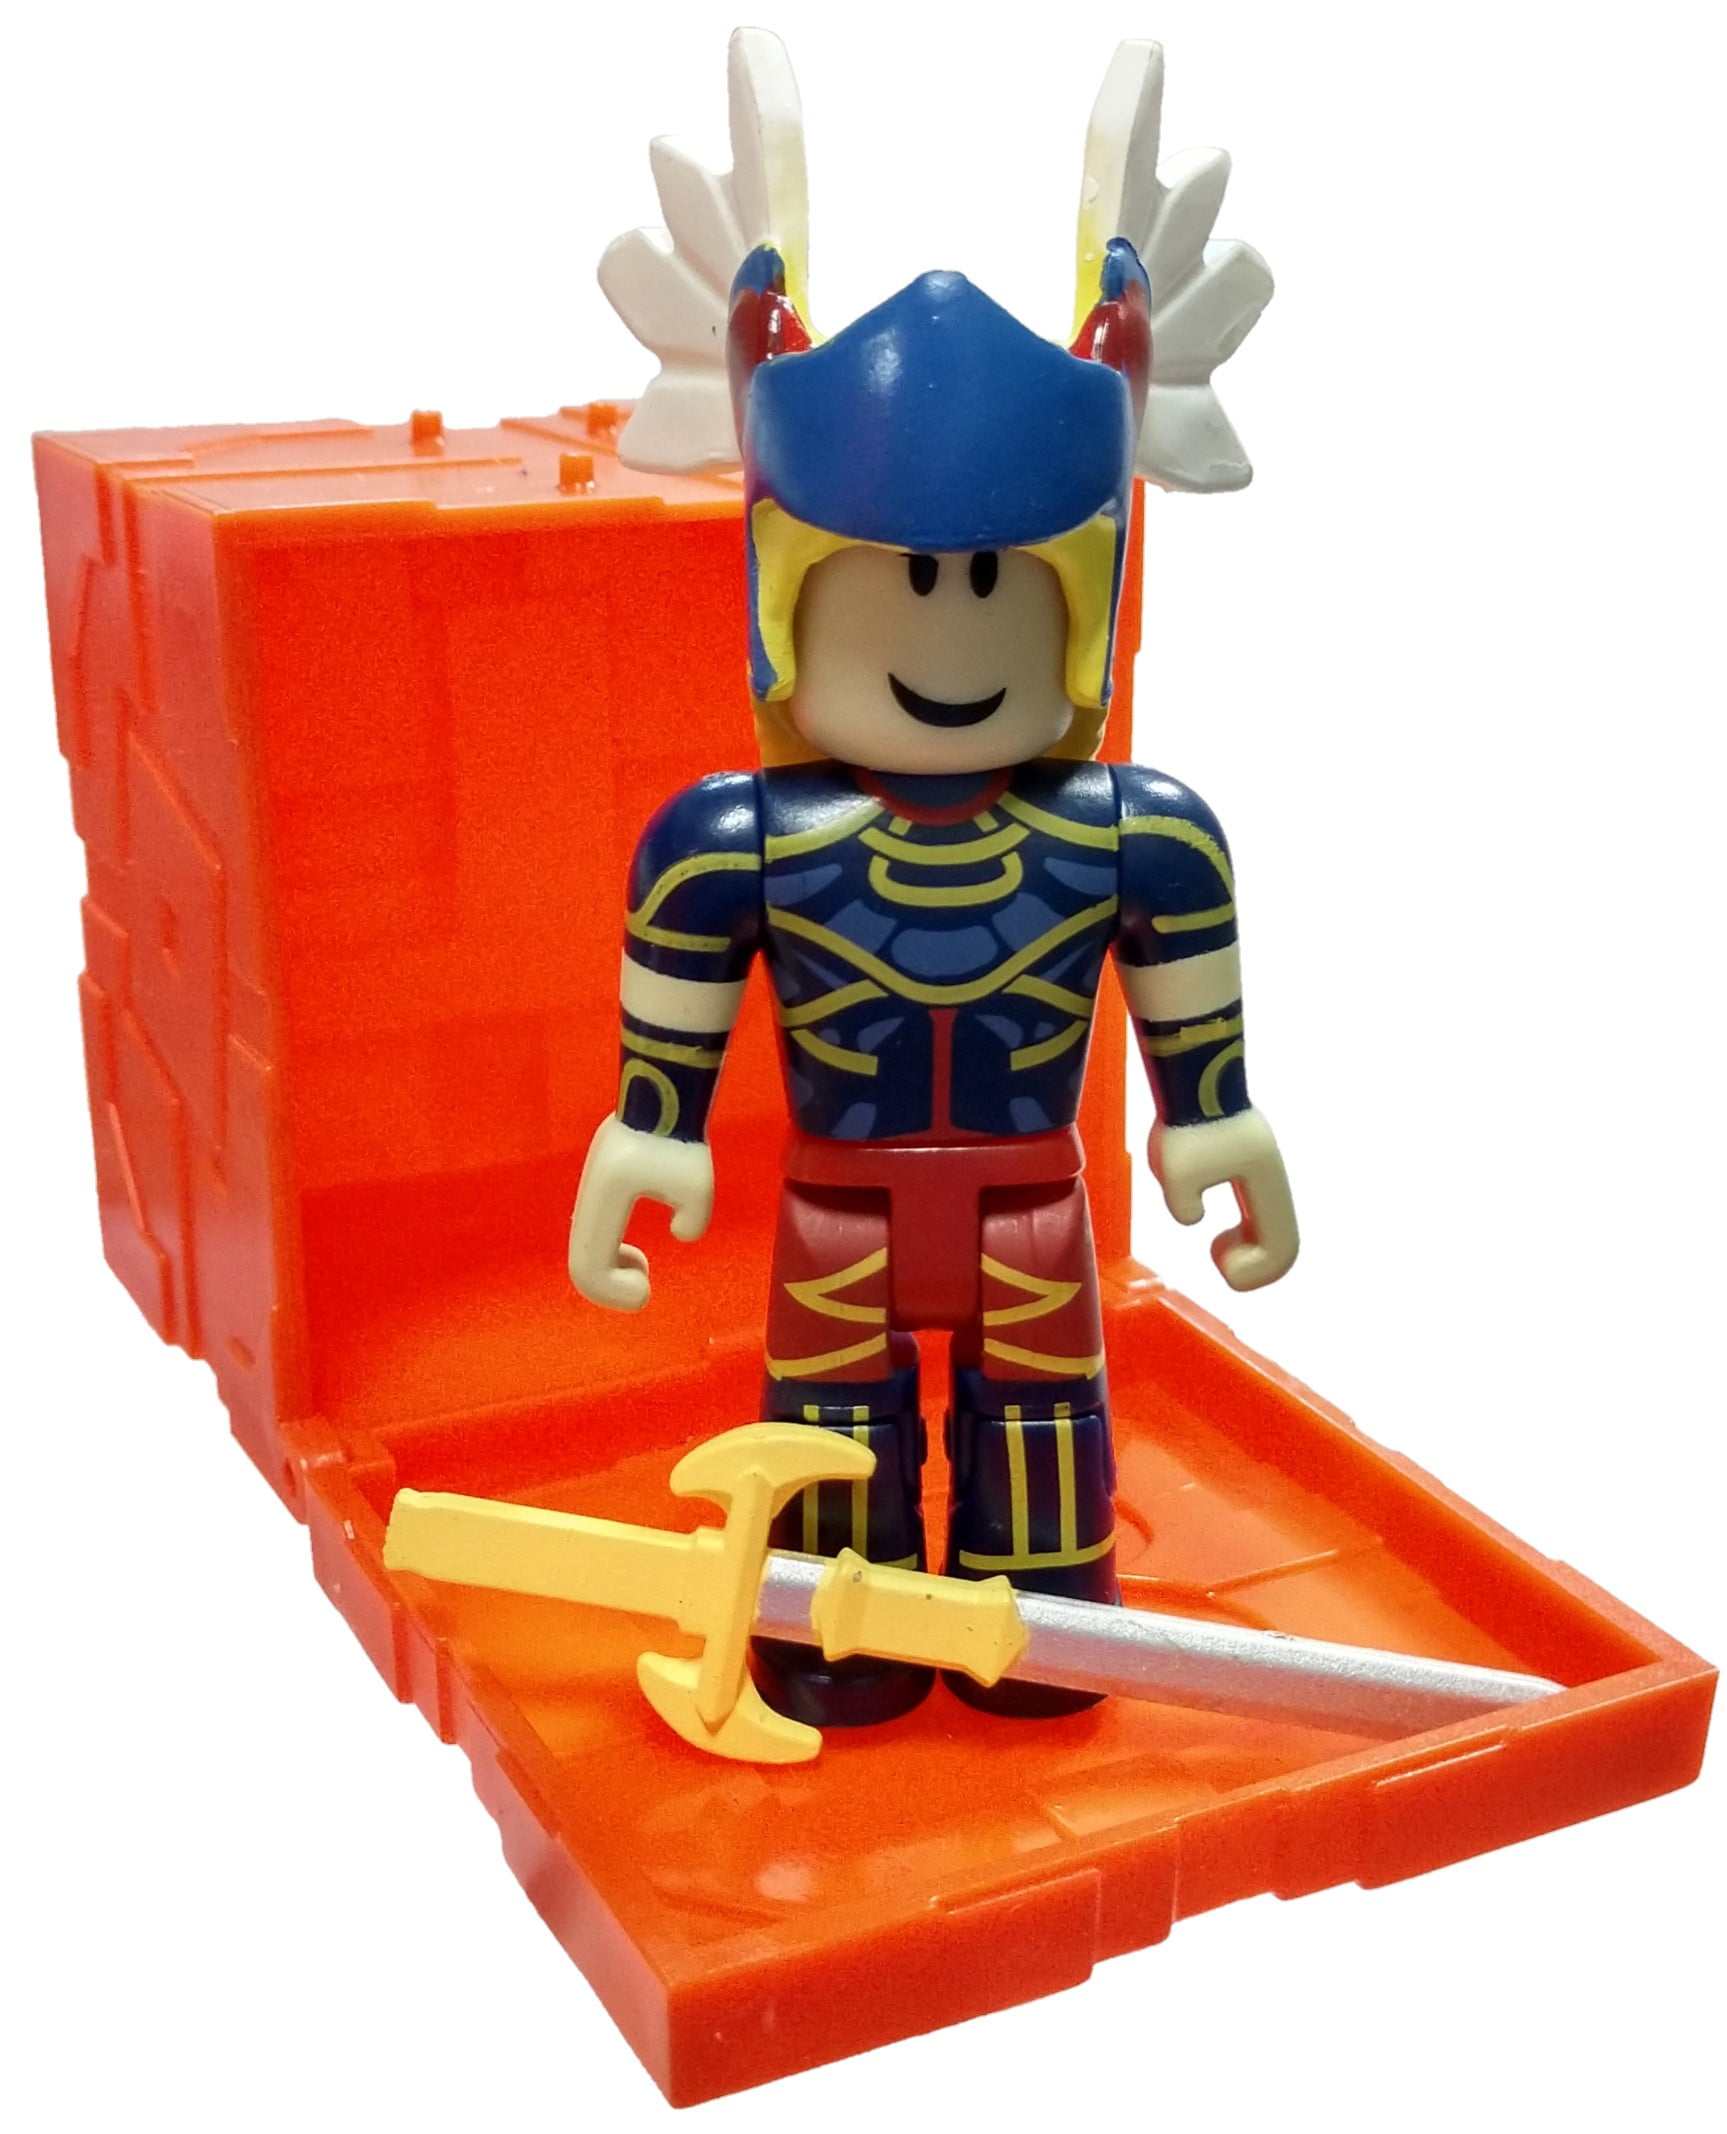 Roblox Series 6 Summoner Tycoon Valkyrie Mini Figure With Orange Cube And Online Code No Packaging Walmart Com Walmart Com - roblox toy red valk code